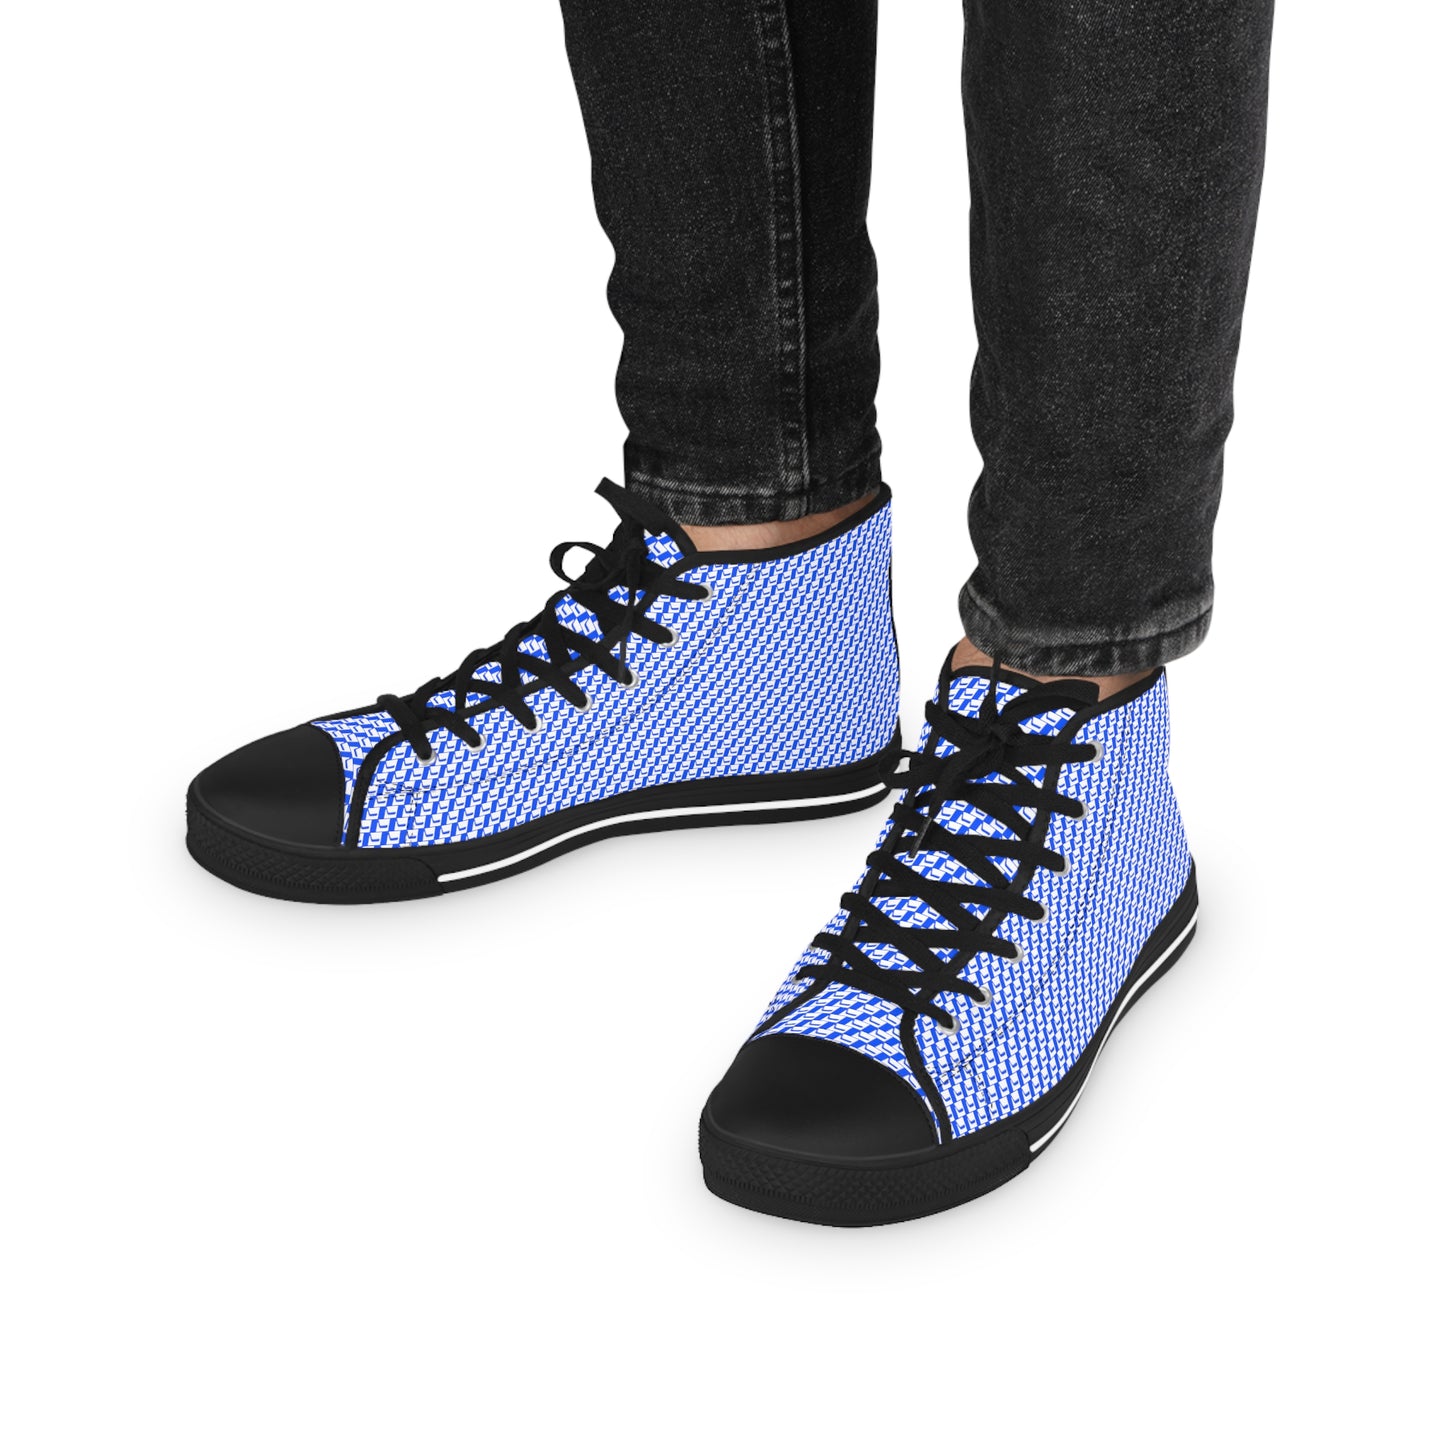 Icon Men's High Top Sneakers